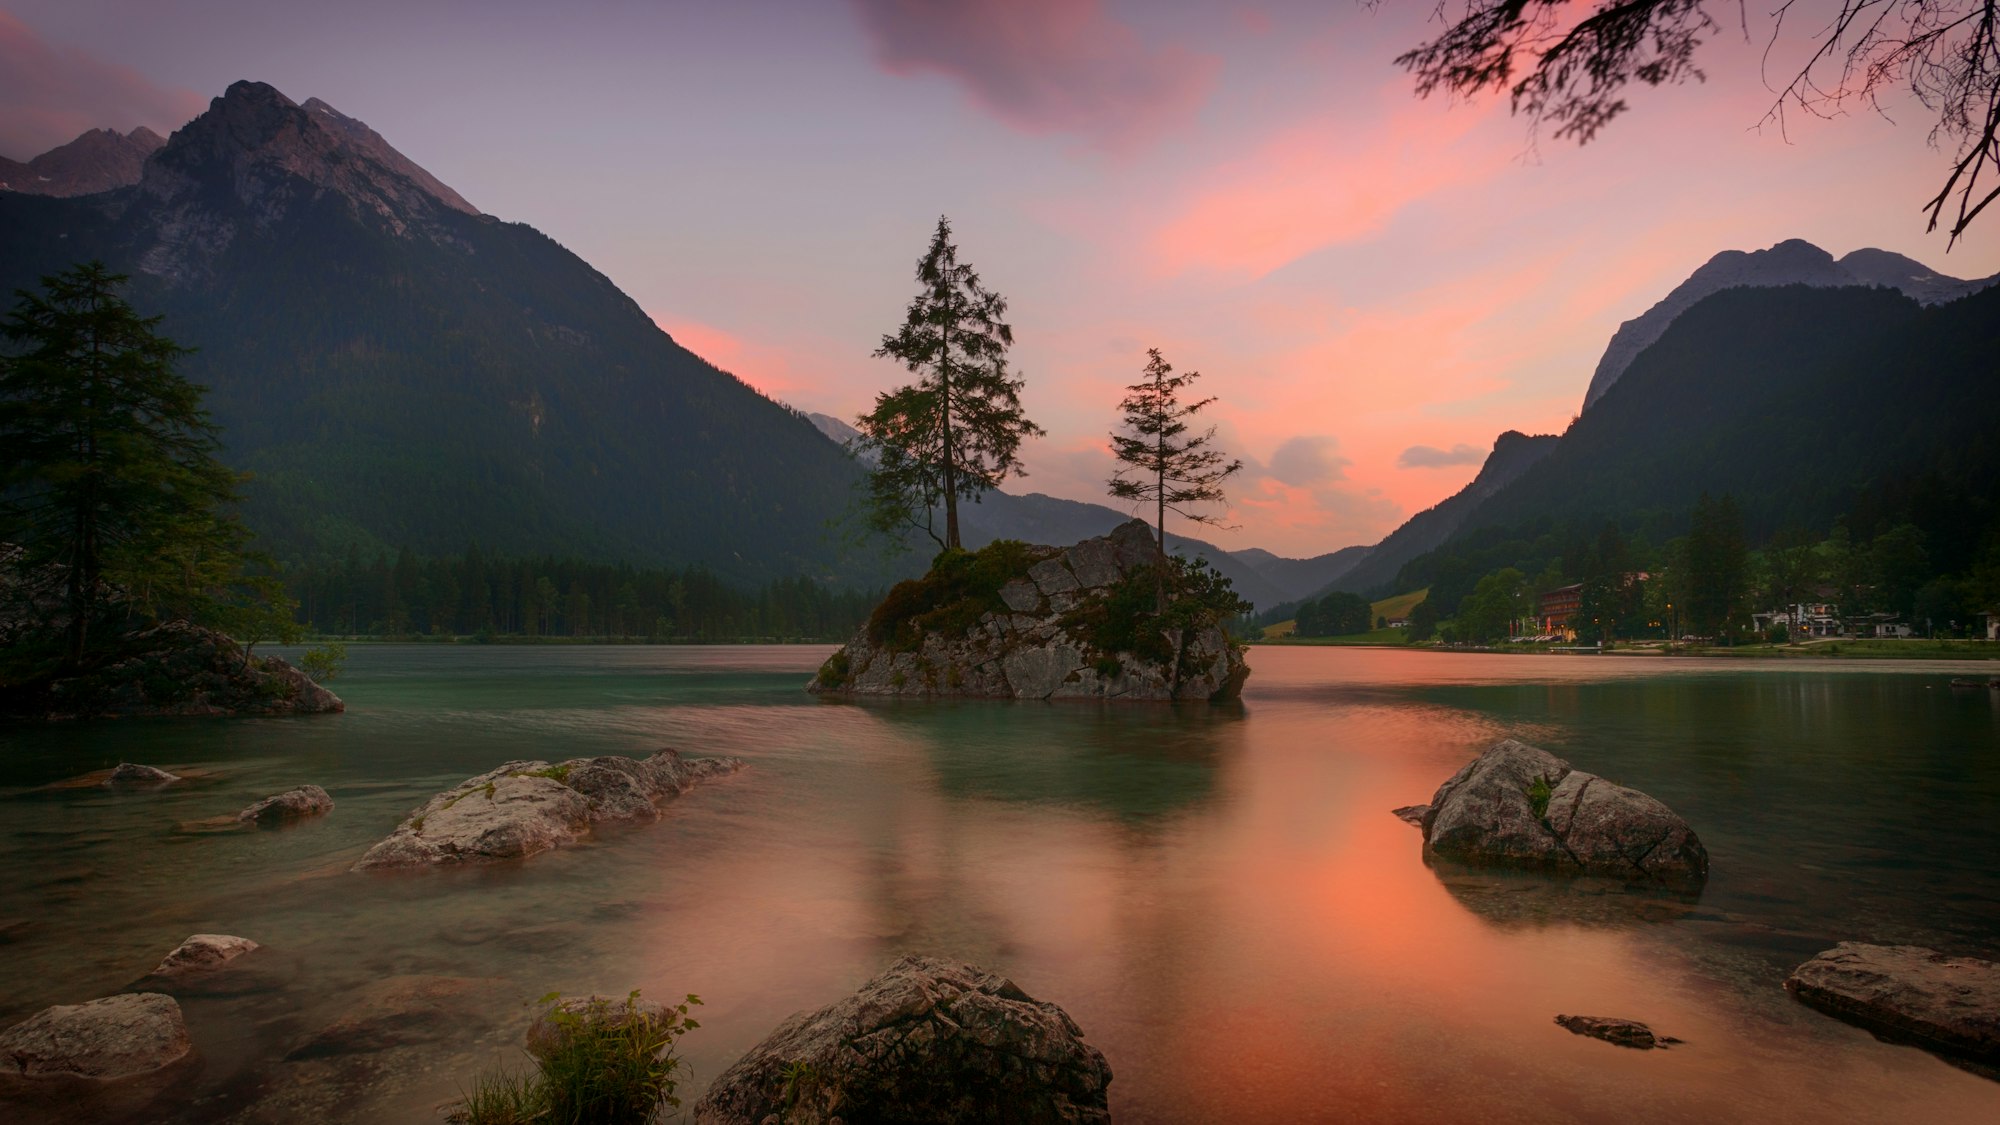 landscape photography of tree on rock formation surrounded by body of water near mountain during sunset